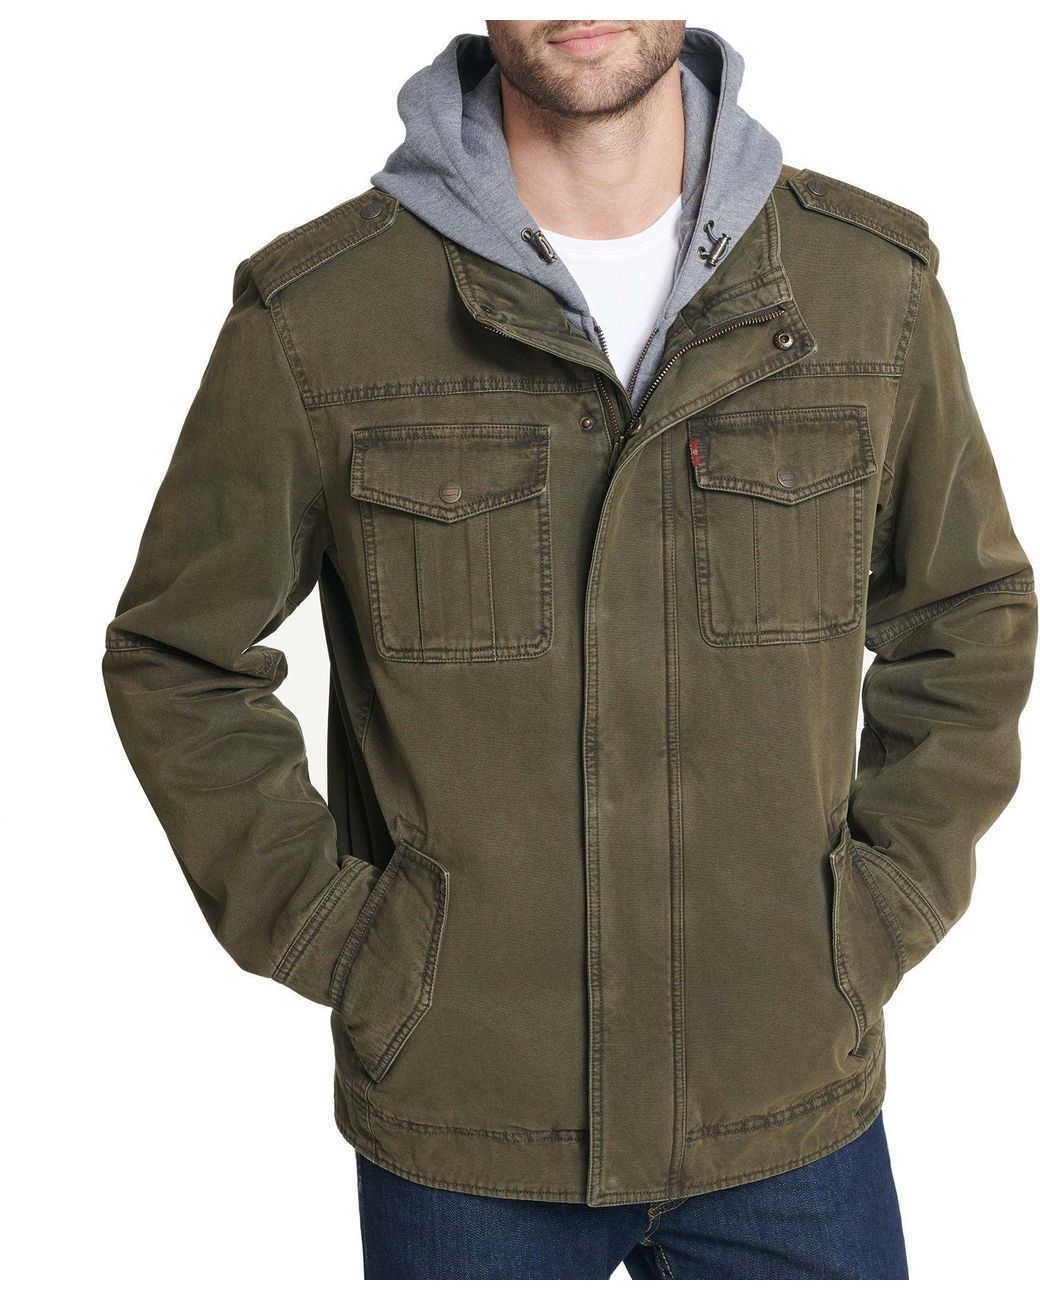 Levi's Sherpa Lined Hooded Utility Jacket in Olive (Green) for Men - Lyst